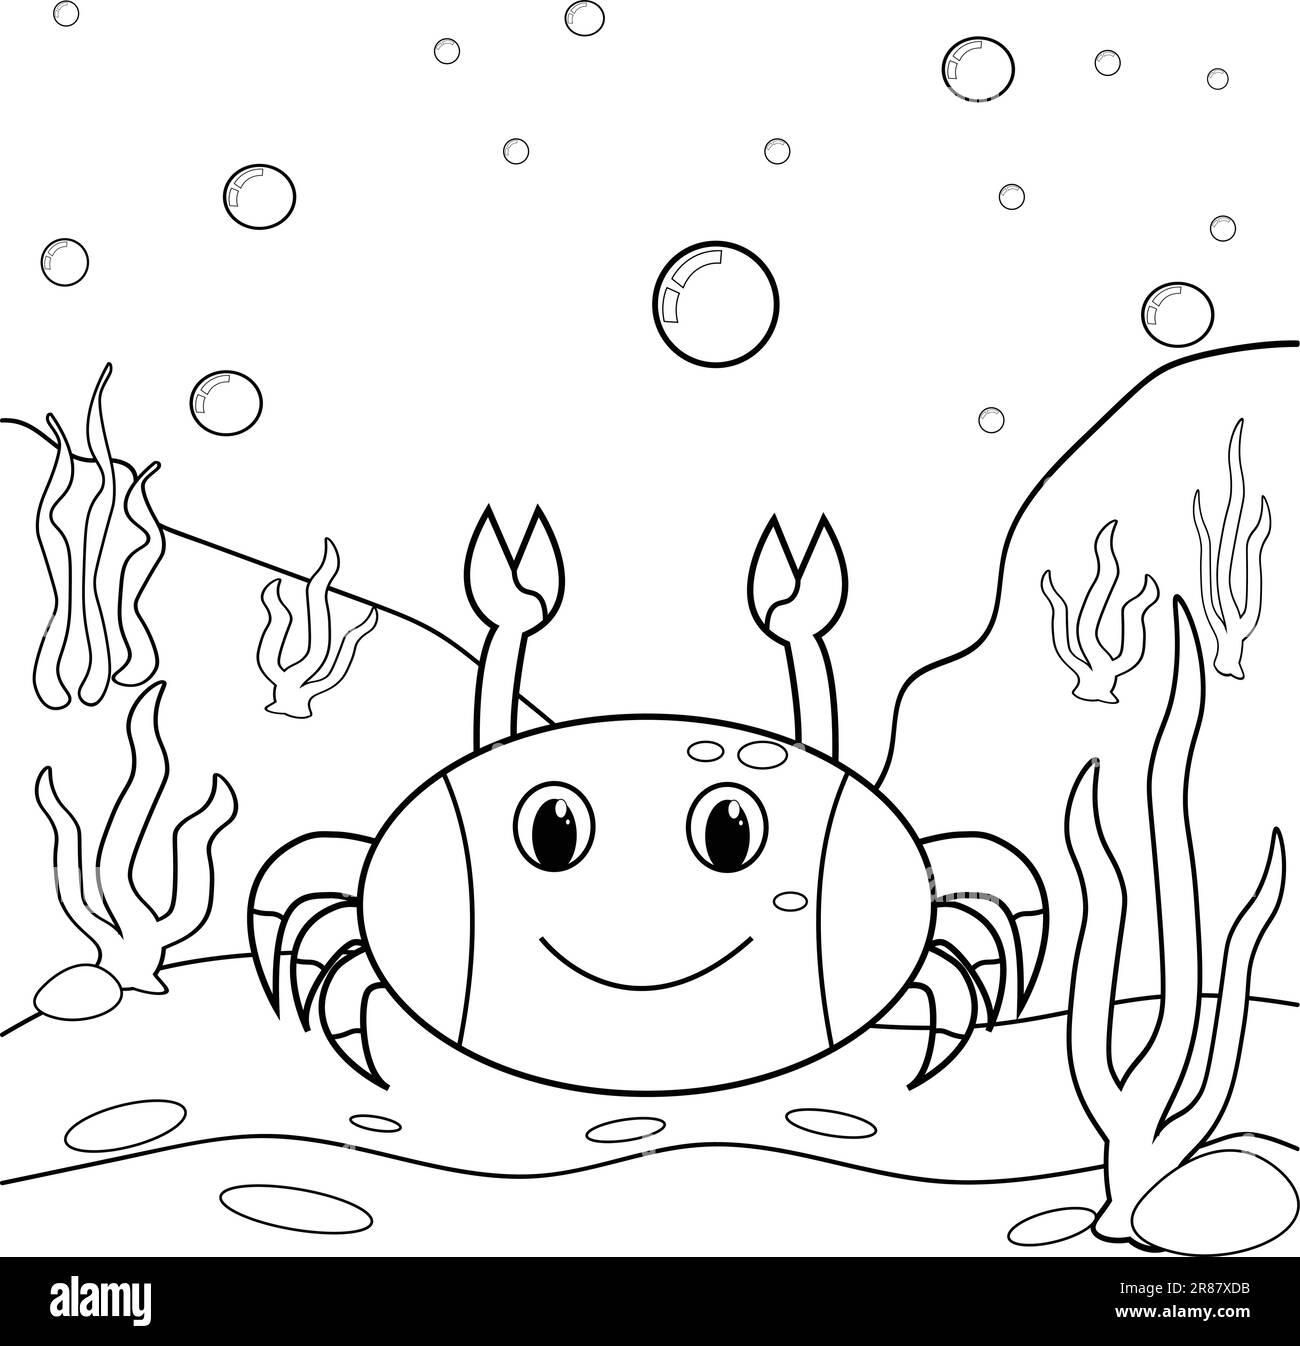 https://c8.alamy.com/comp/2R87XDB/coloring-page-of-a-cartoon-crab-underwater-illustration-for-coloring-page-for-kids-2R87XDB.jpg